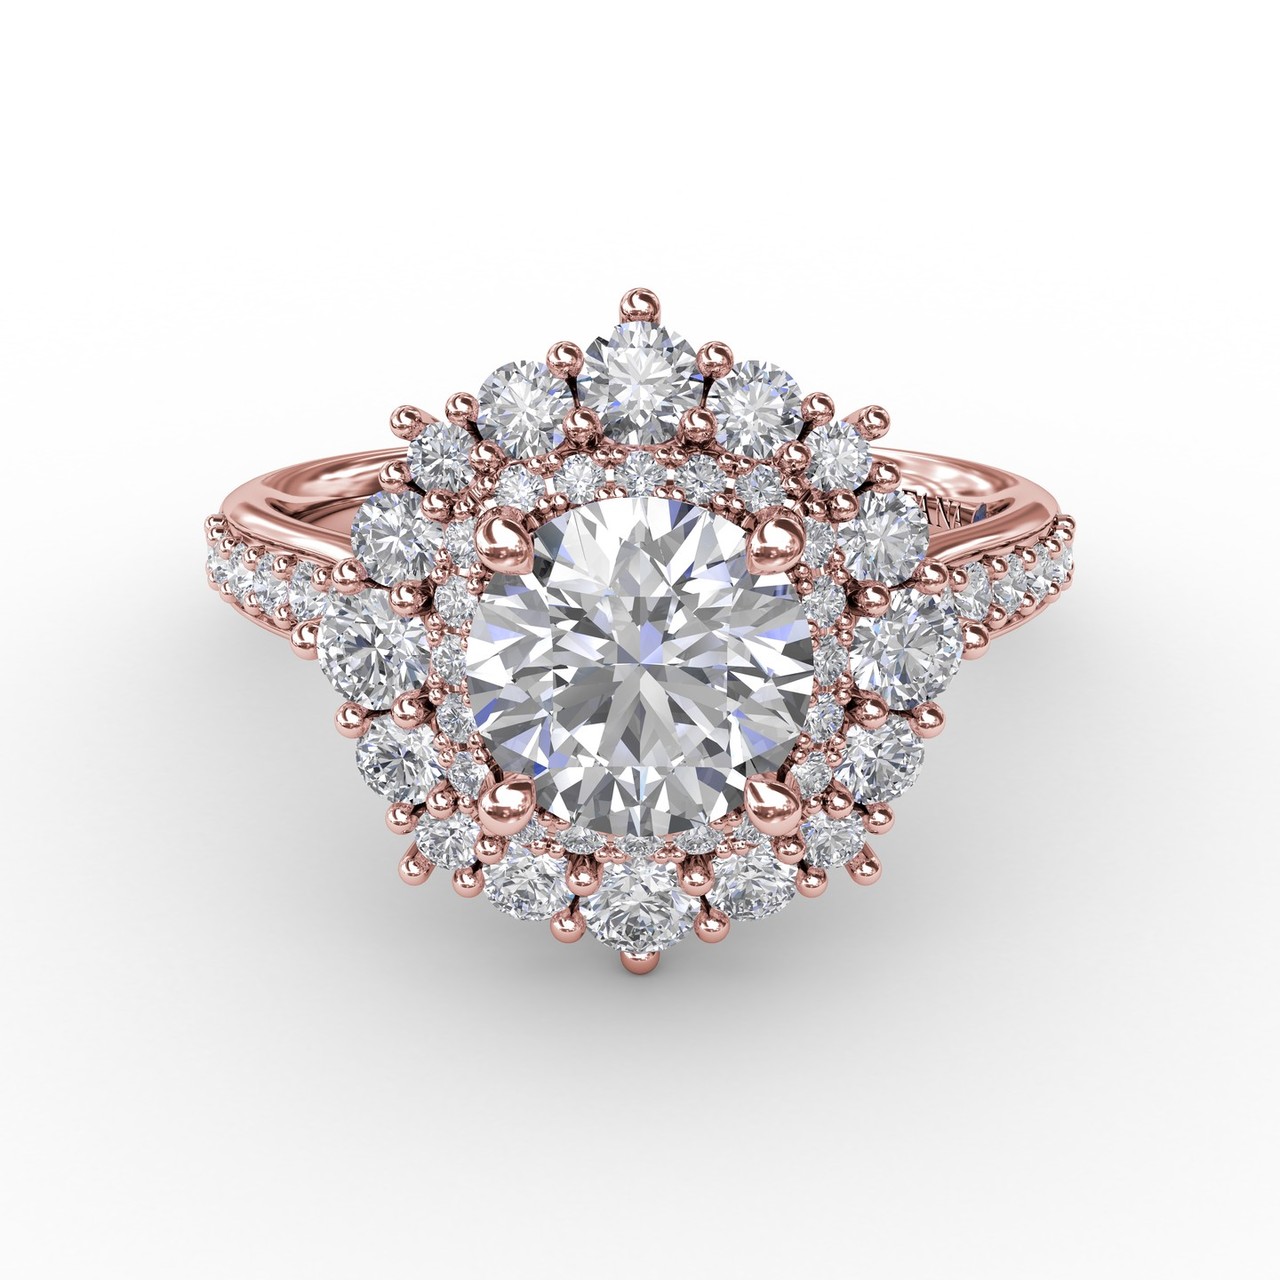 Double Halo Engagement Rings | With Clarity